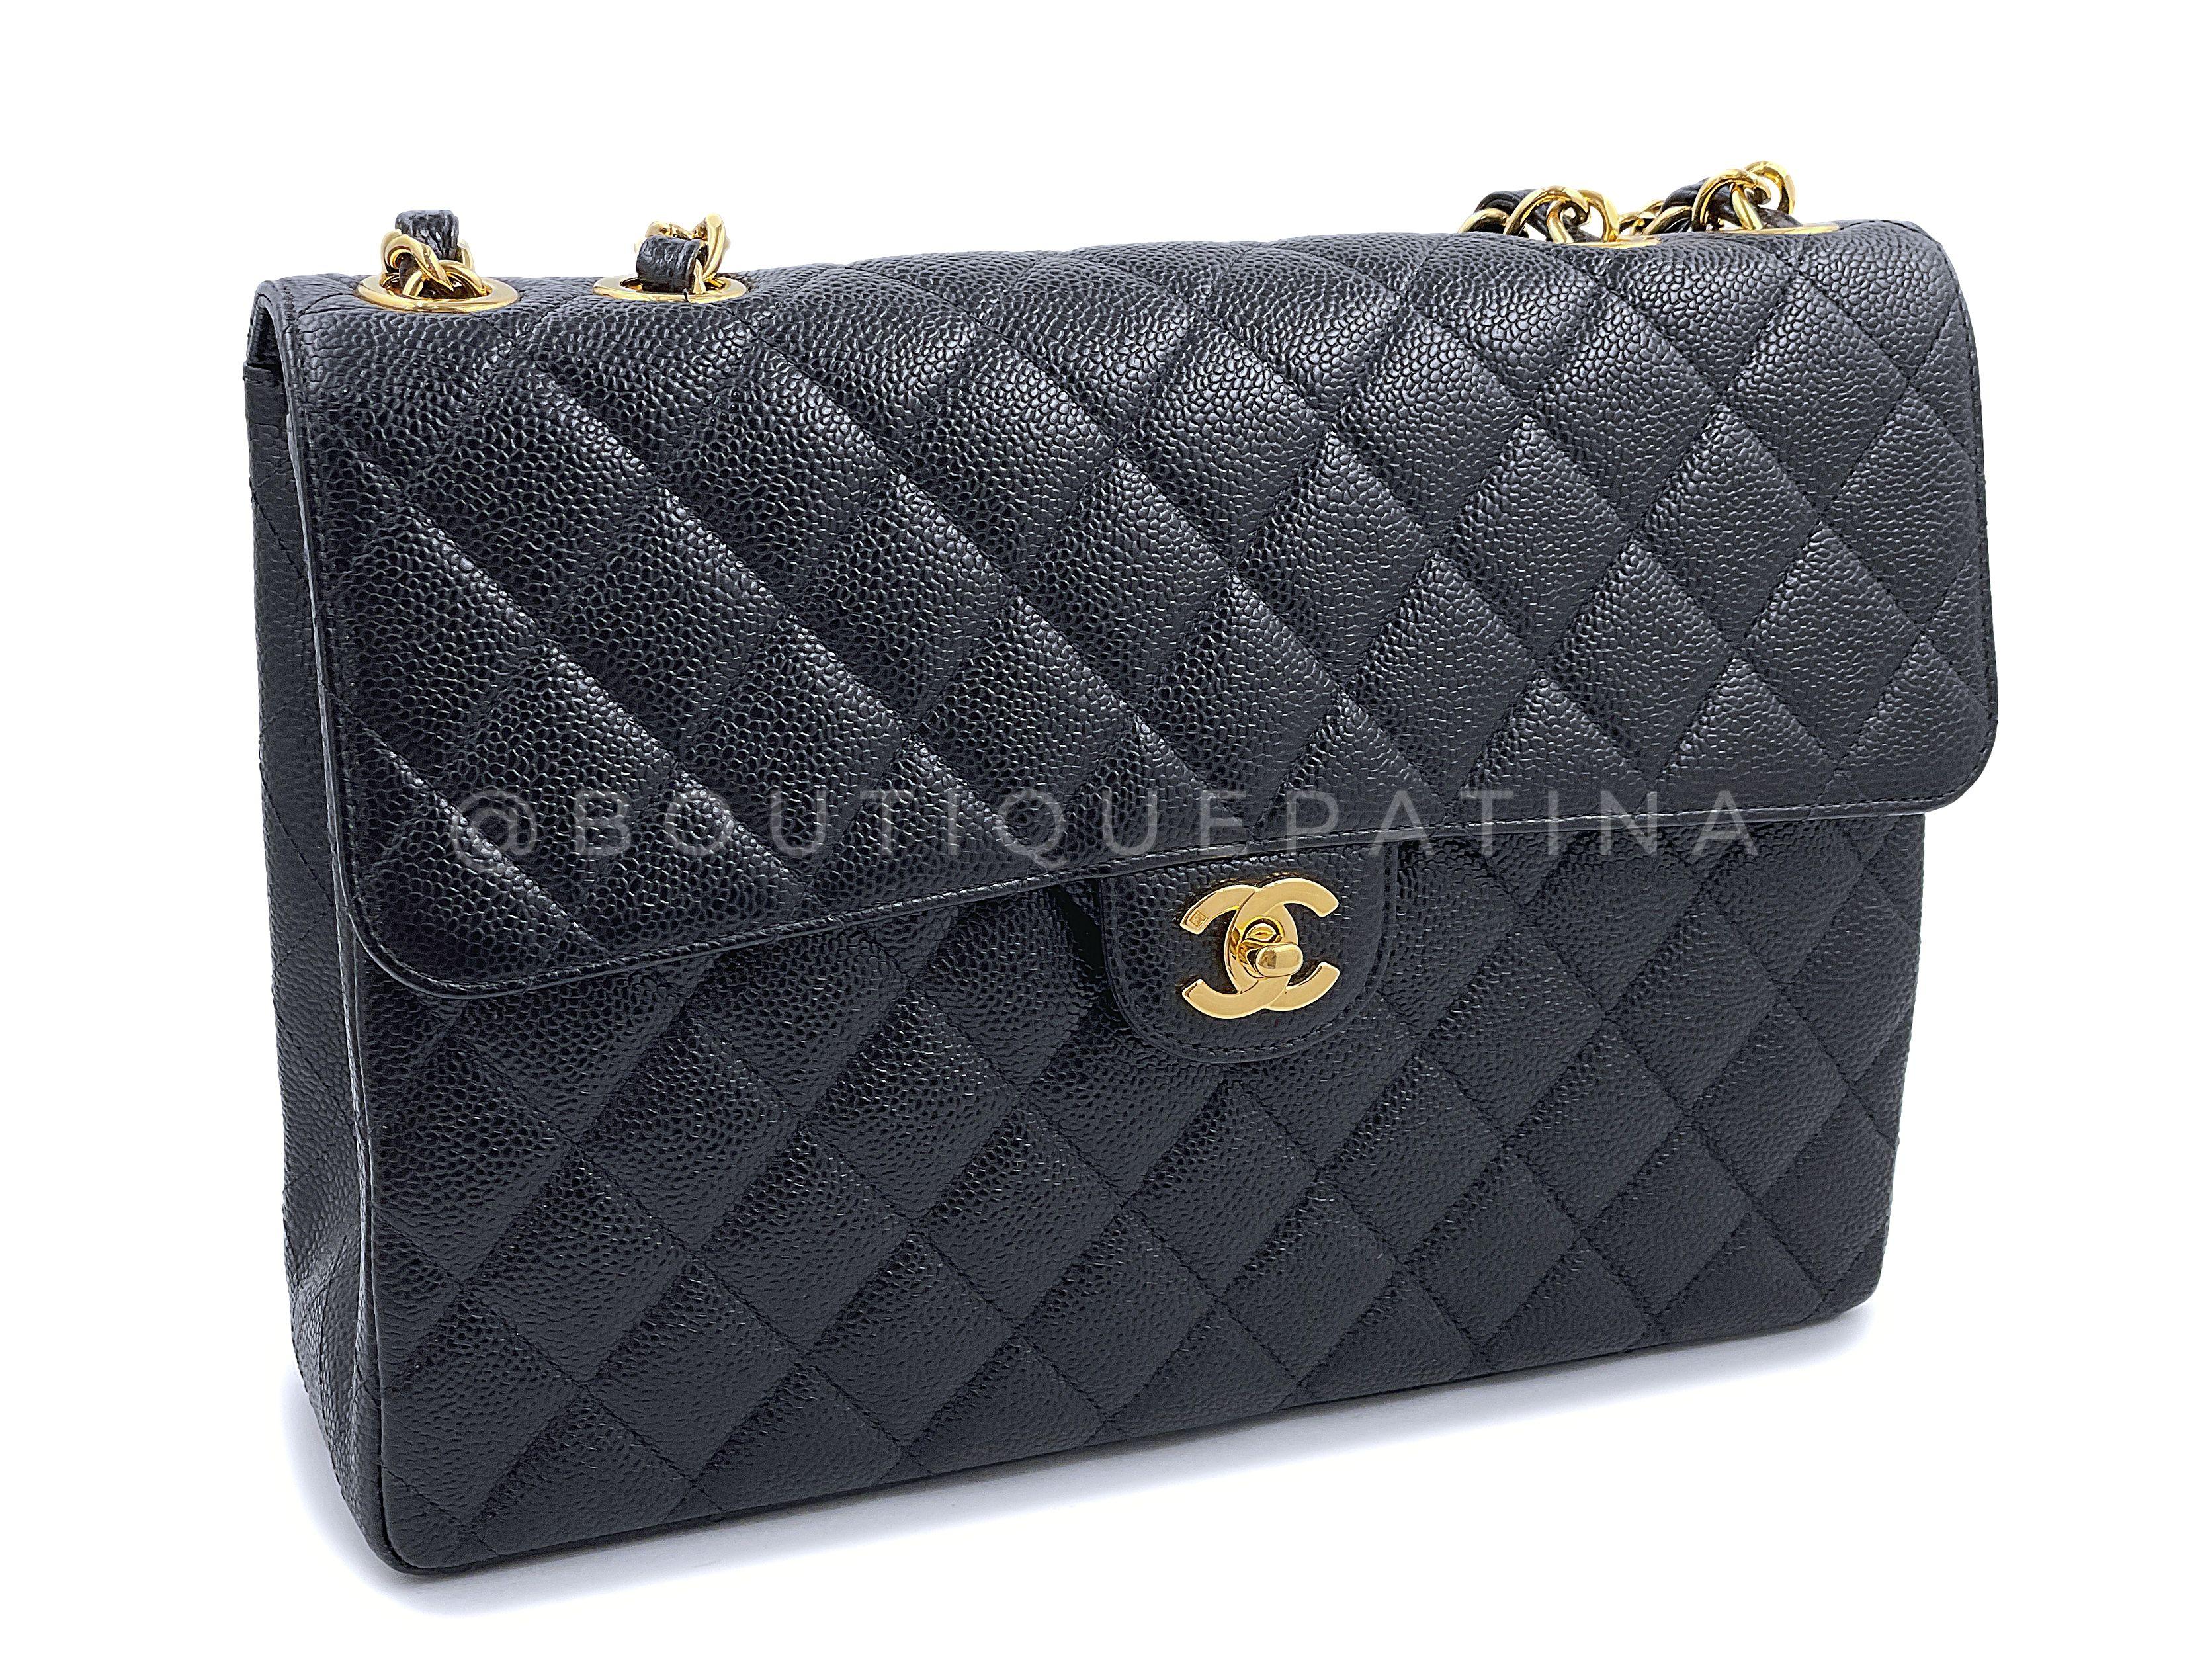 Pristine Chanel 2002 Vintage Black Caviar Jumbo Classic Flap Bag 24k GHW 67313 In Excellent Condition In Costa Mesa, CA